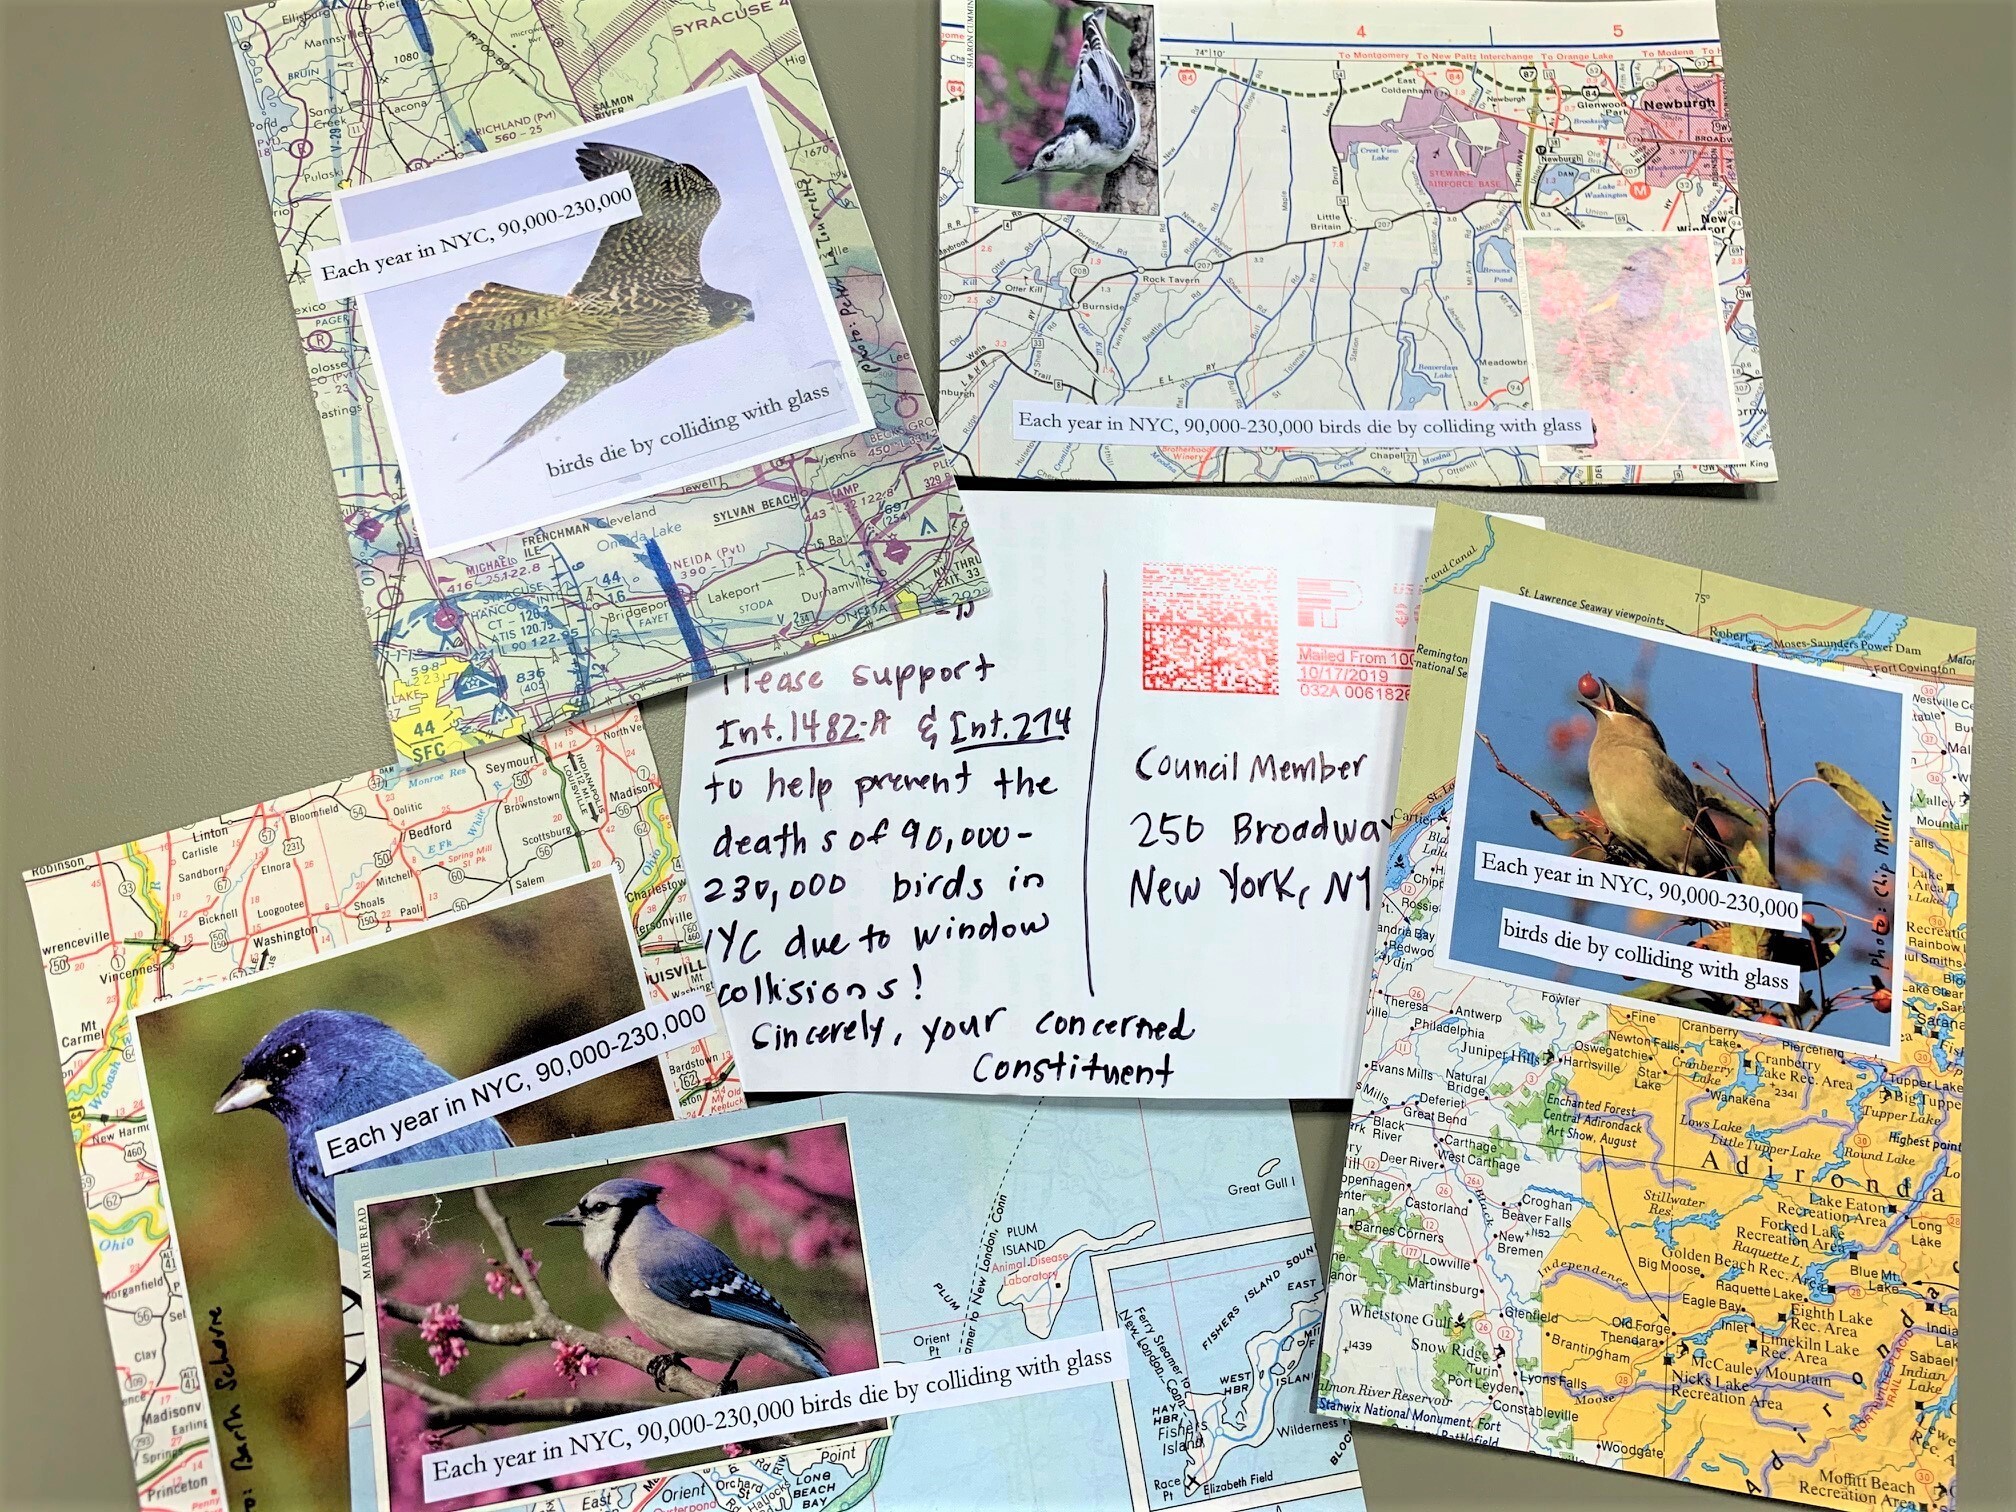 Postcards to government officials were part of NYC Audubon’s successful advocacy for bird-friendly building legislation in New York City. Photo: NYC Audubon